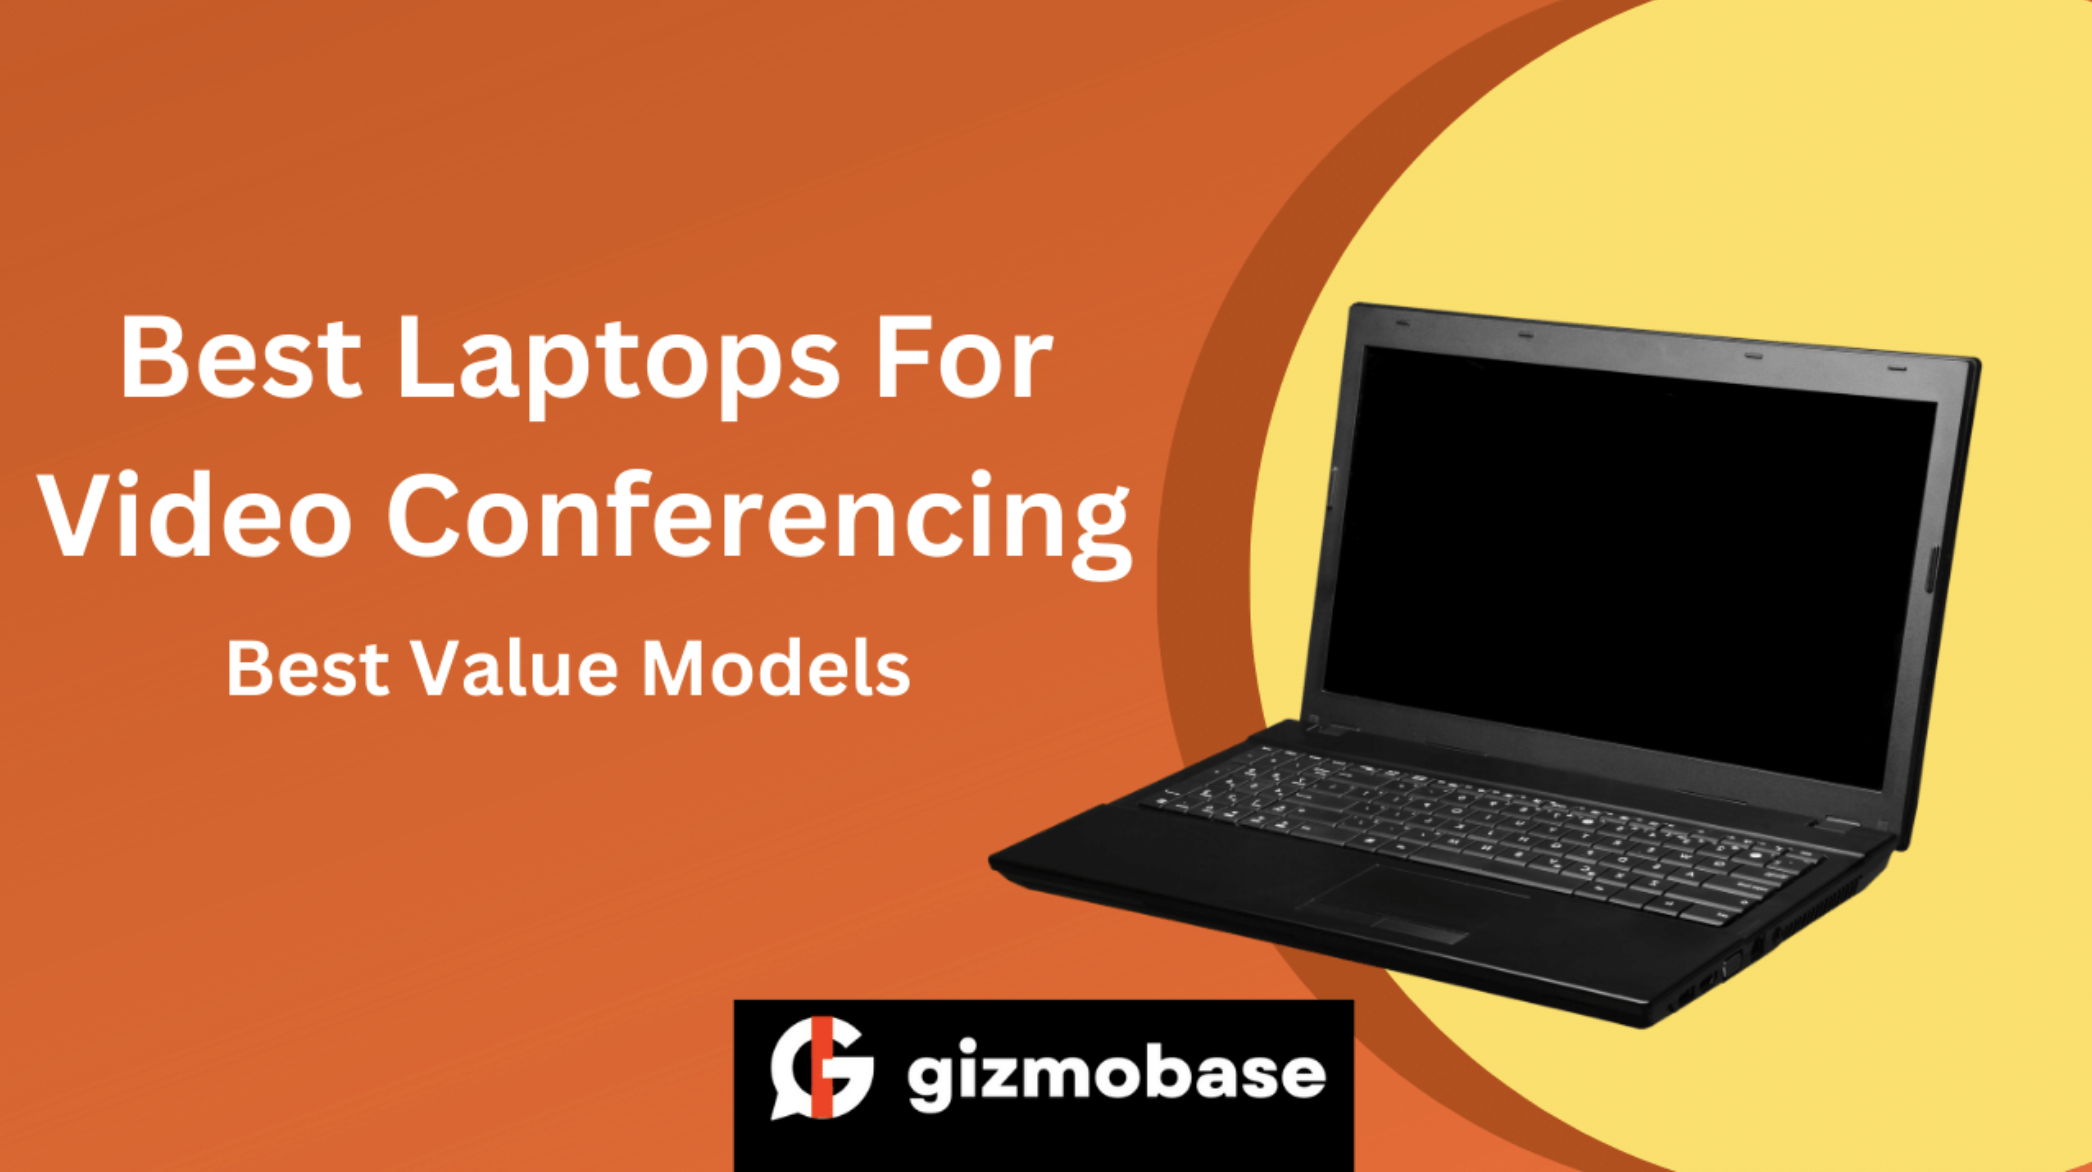 Best Laptops For Video Conferencing